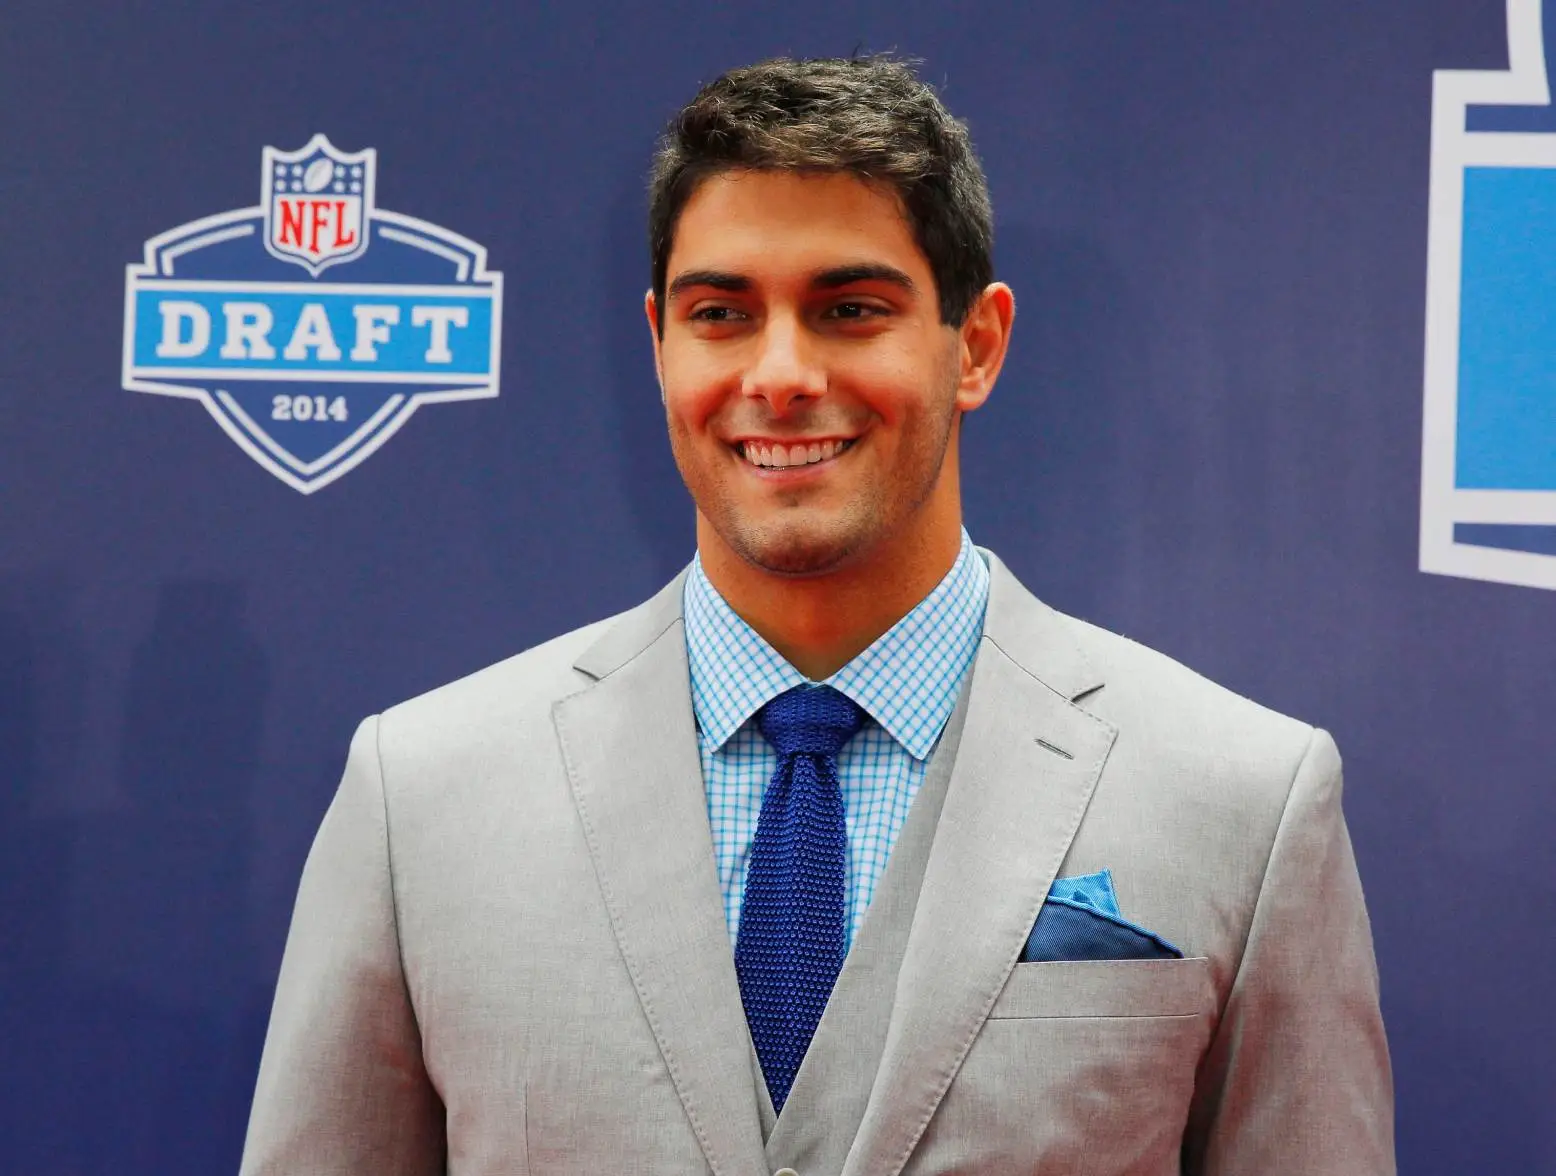 May 8, 2014; New York, NY, USA: Jimmy Garoppolo (Eastern Illinois) poses for a photo during the NFL Draft Red Carpet arrivals at Radio City Music Hall. Credit: Andy Marlin-USA TODAY Sports